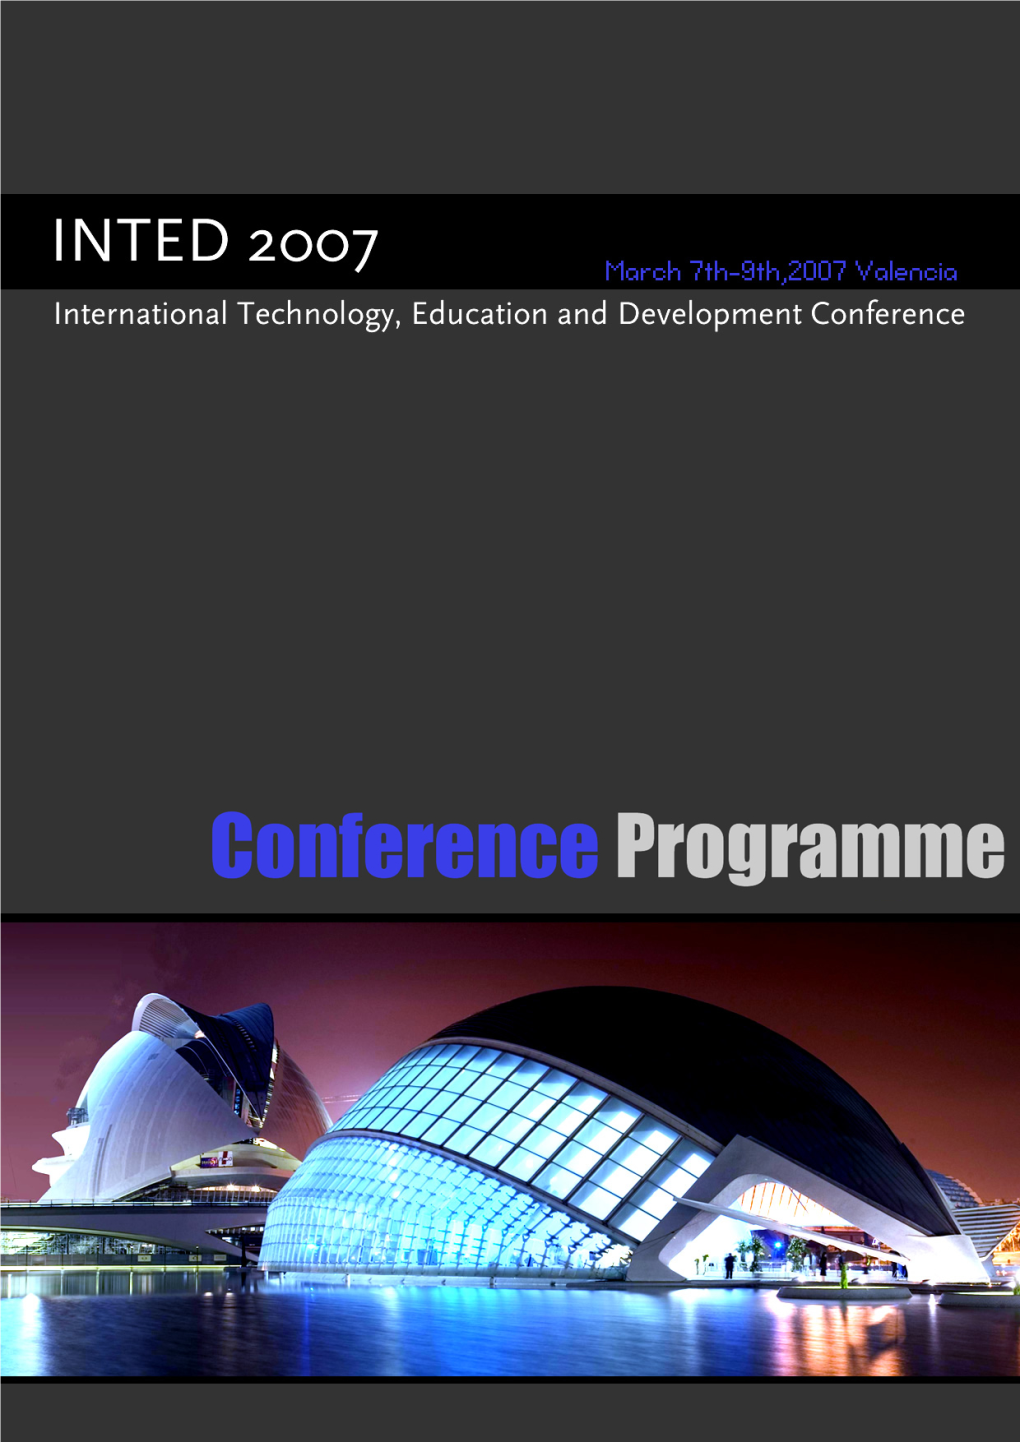 INTED2007 Conference Programme